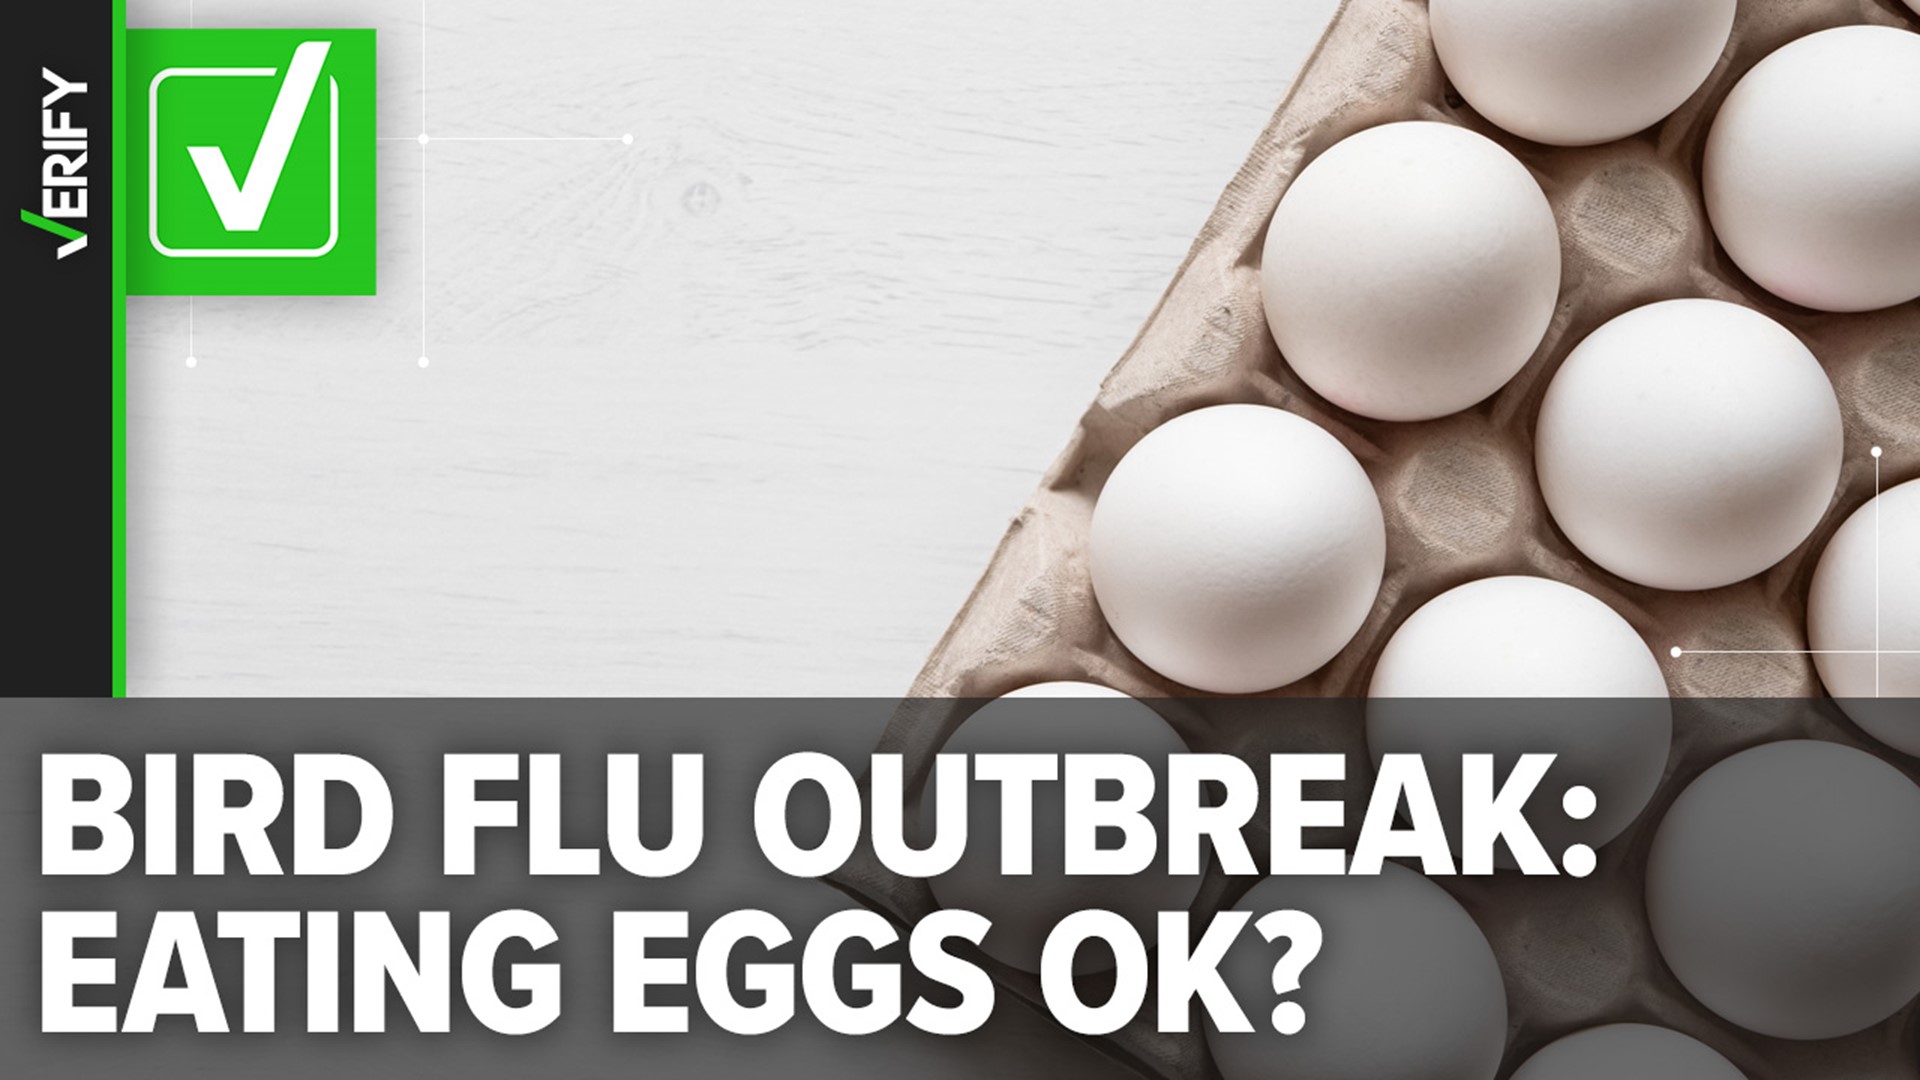 There is no evidence anyone has gotten the bird flu from eating eggs. Experts say fully cooking eggs reduces the risk of illnesses like the bird flu and salmonella.